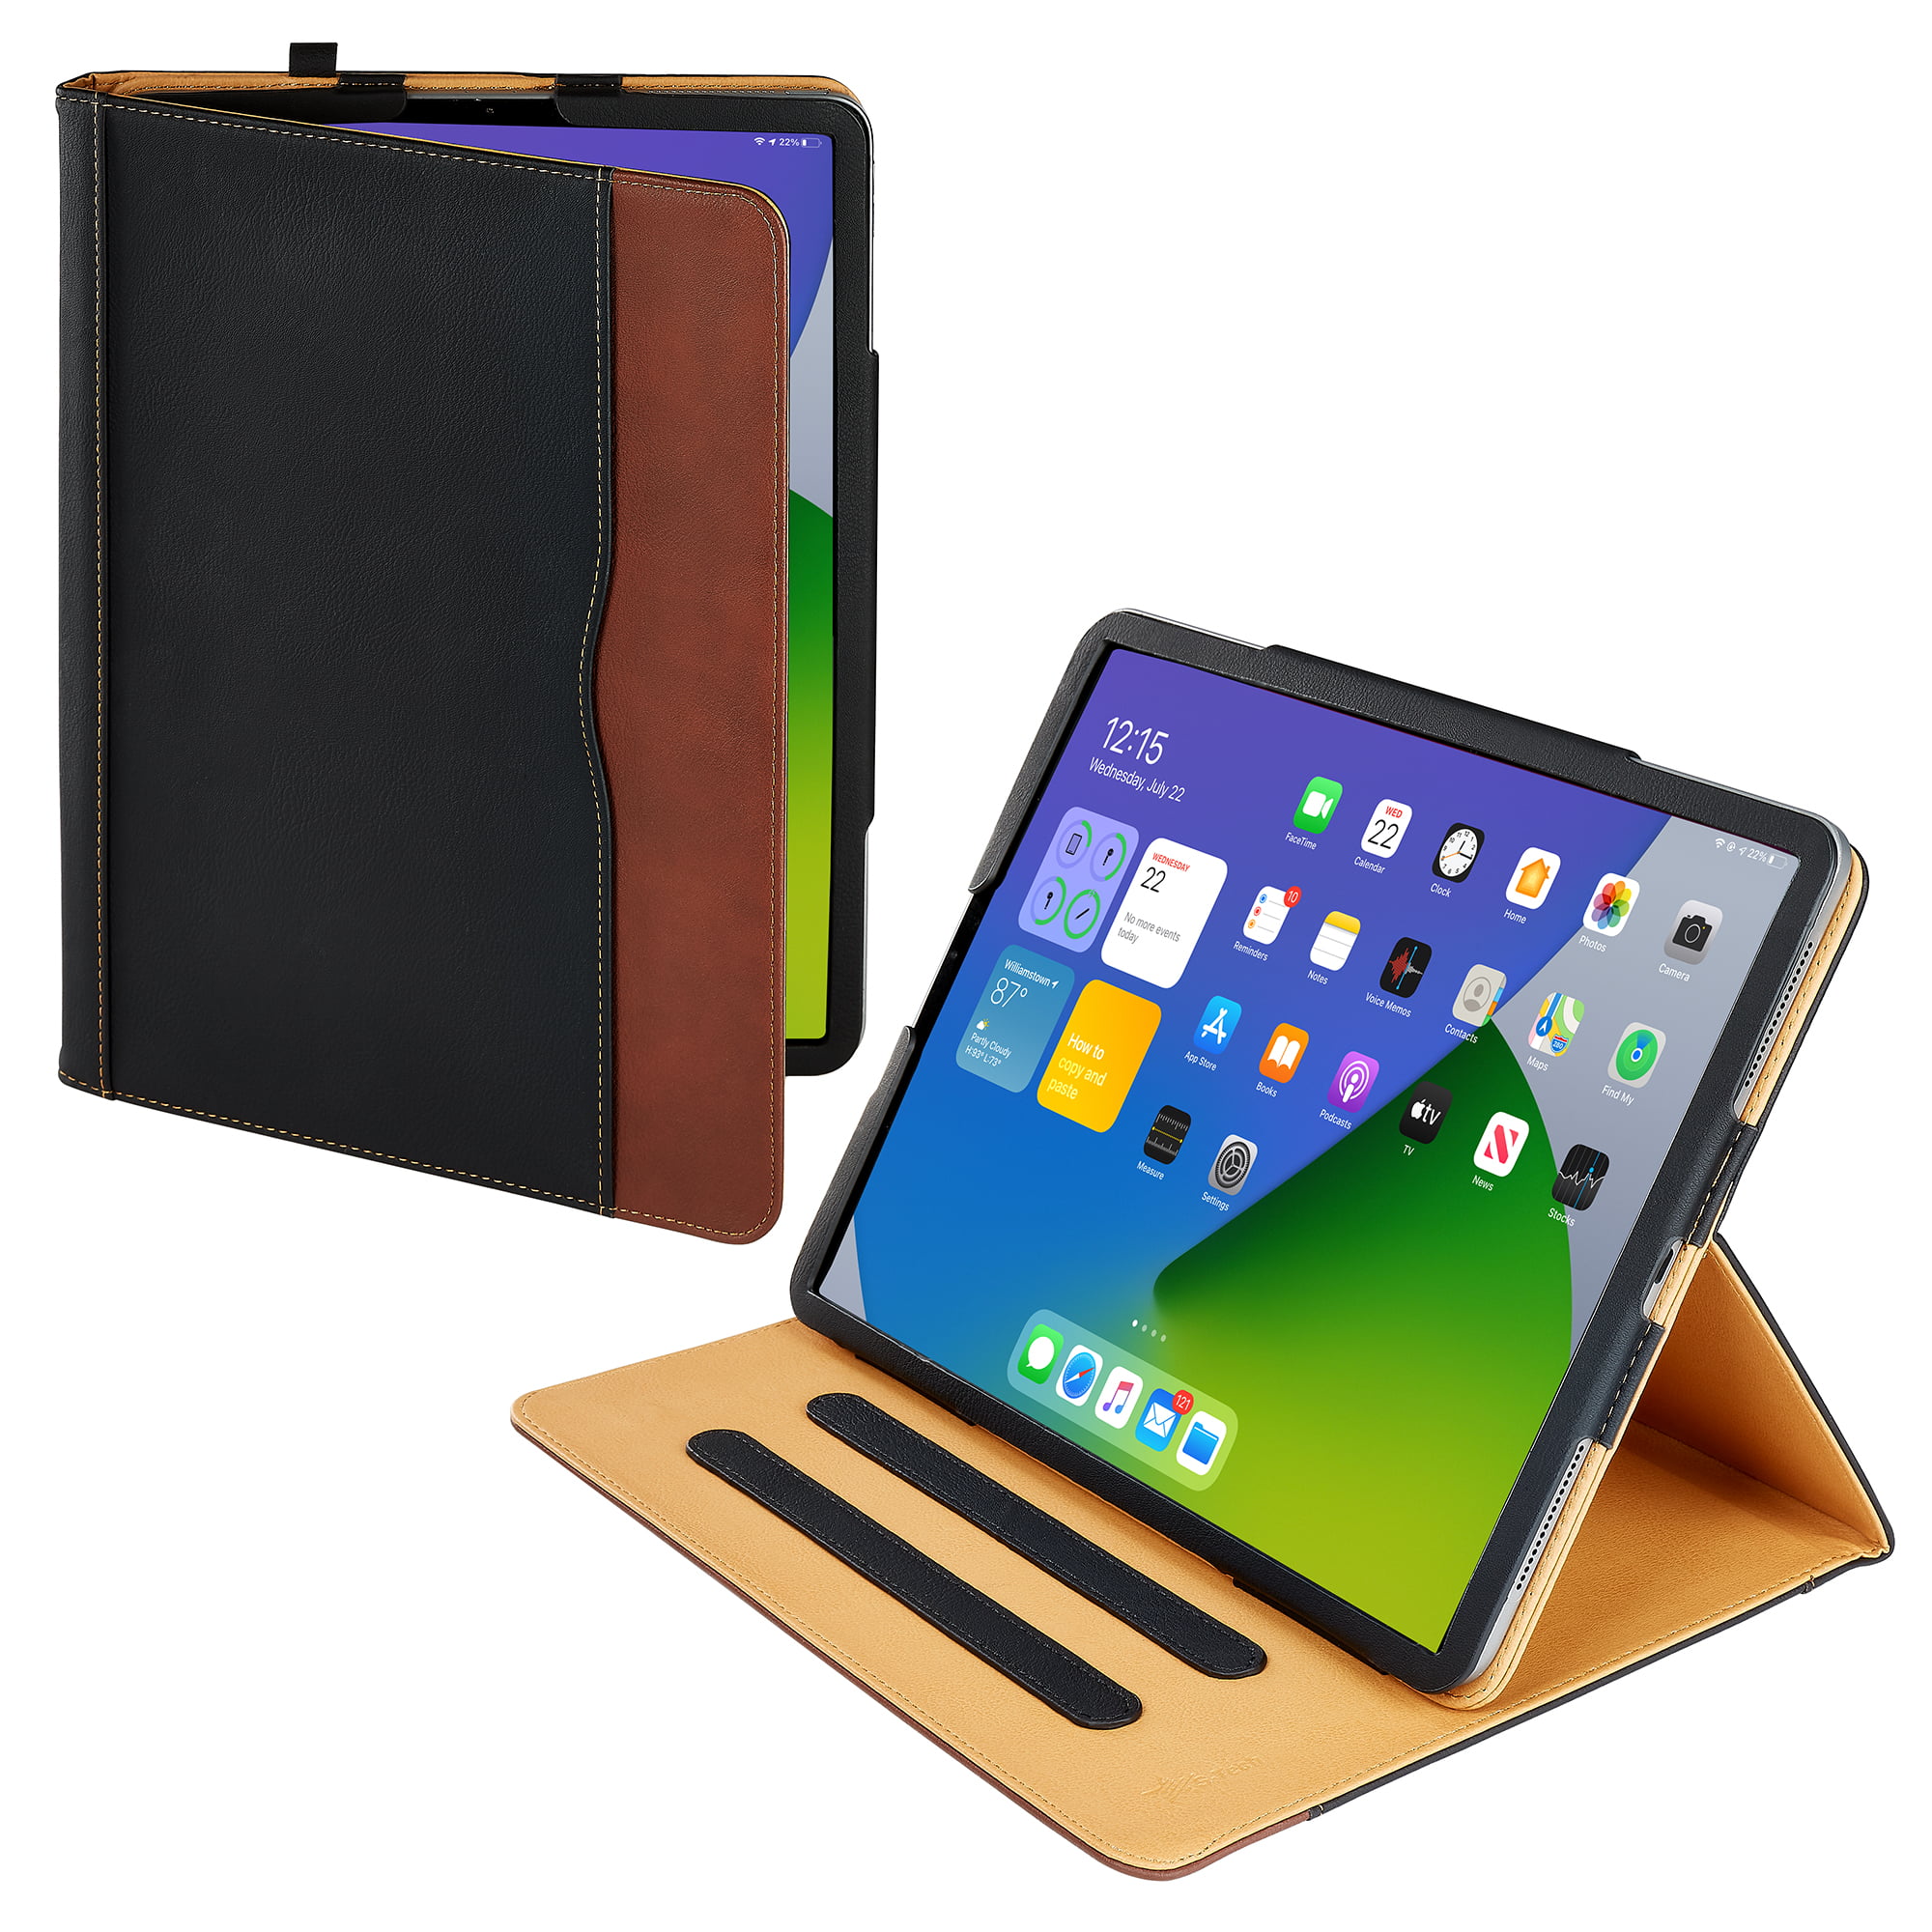 iPad Pro 12.9 Case (4th Generation) Soft Leather Wallet Smart